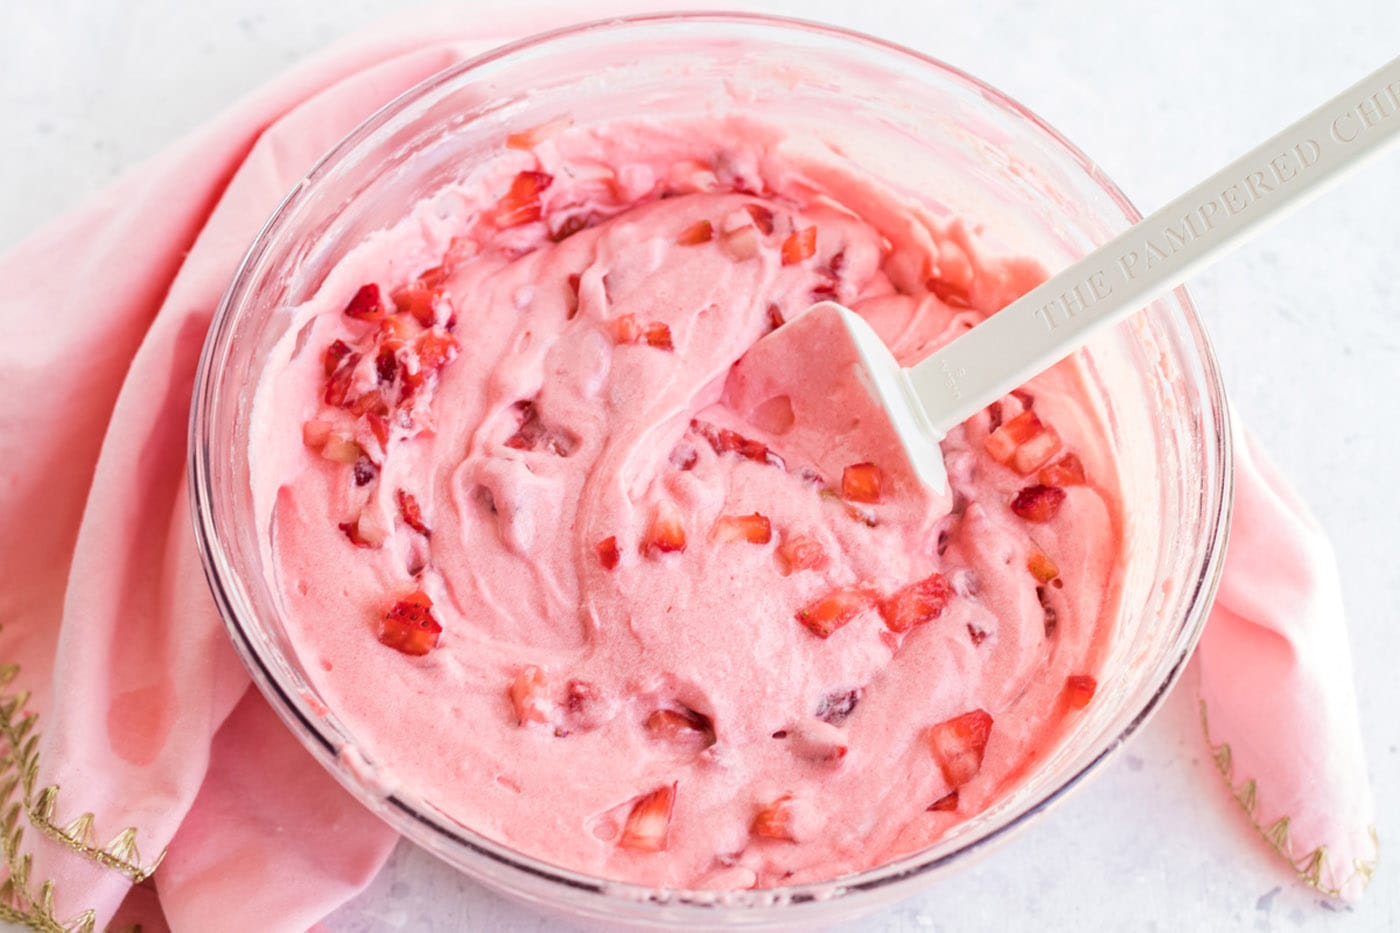 Chopped strawberries added into the cake batter